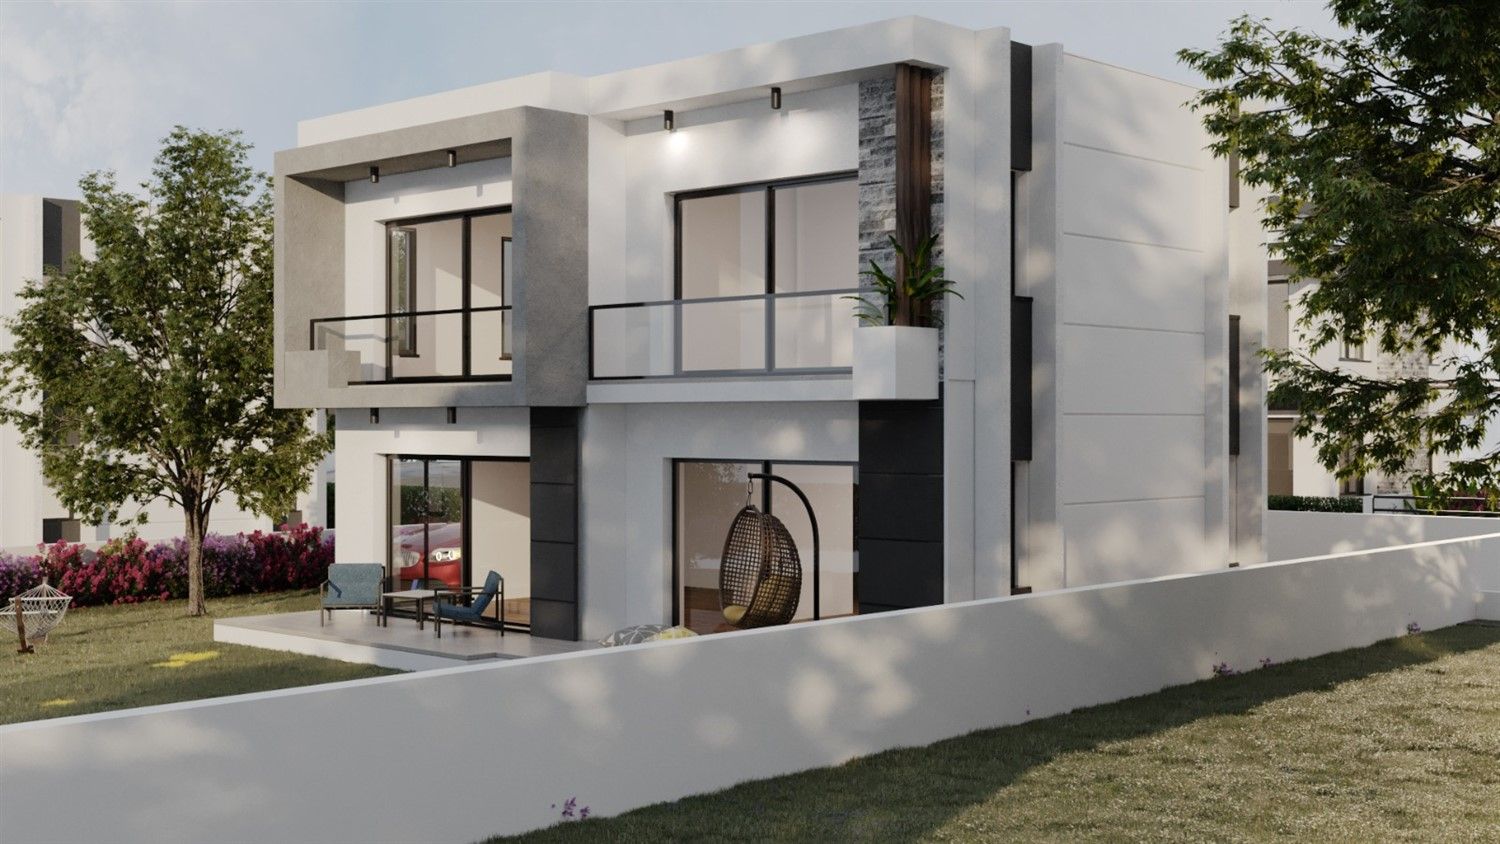 New villas within walking distance from the infrastructure of Kyrenia region